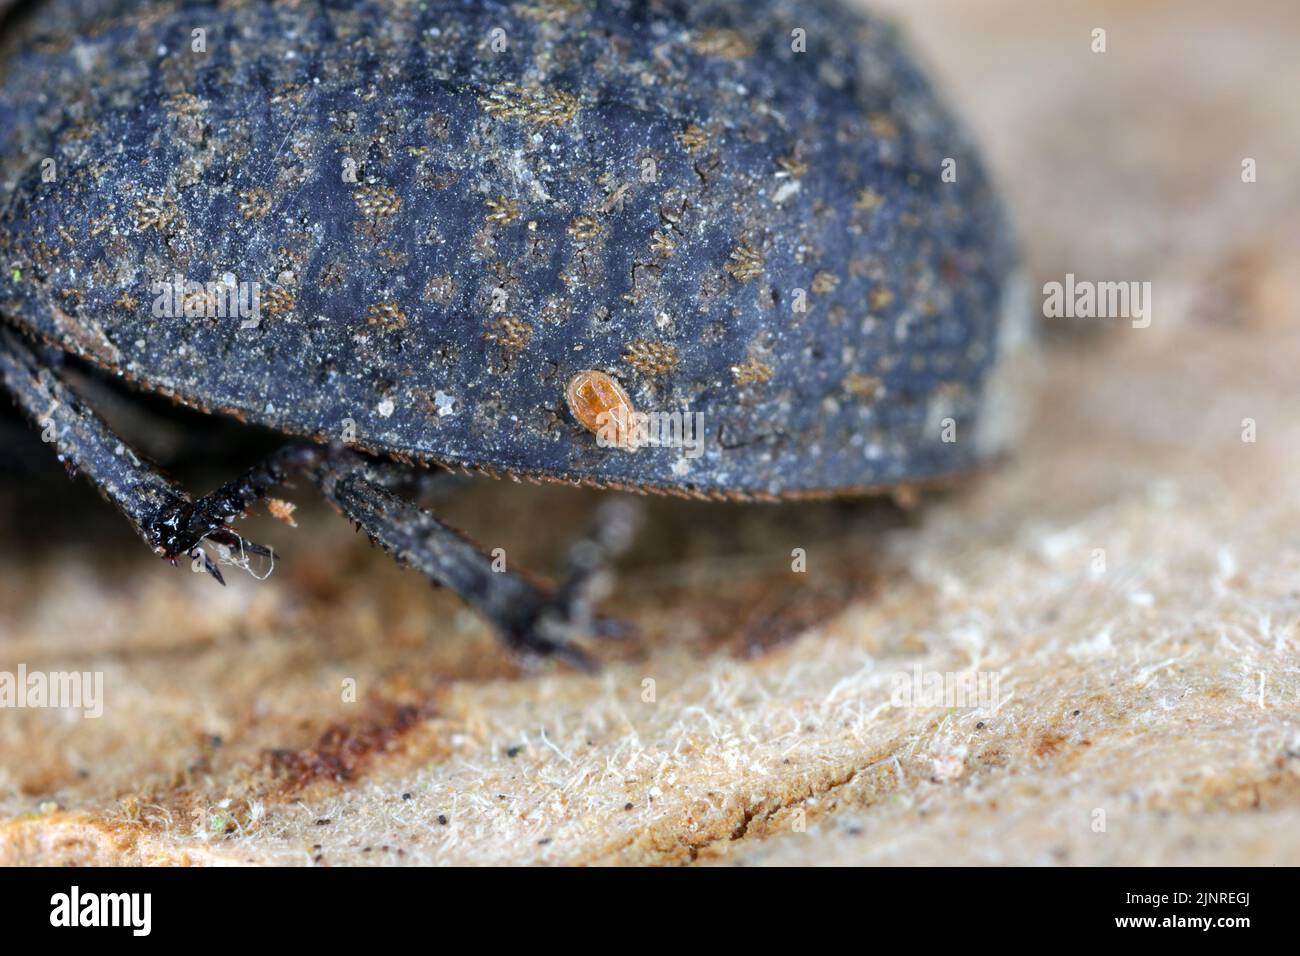 A tiny mite on Hide Beetle (Trox sp.) Stock Photo